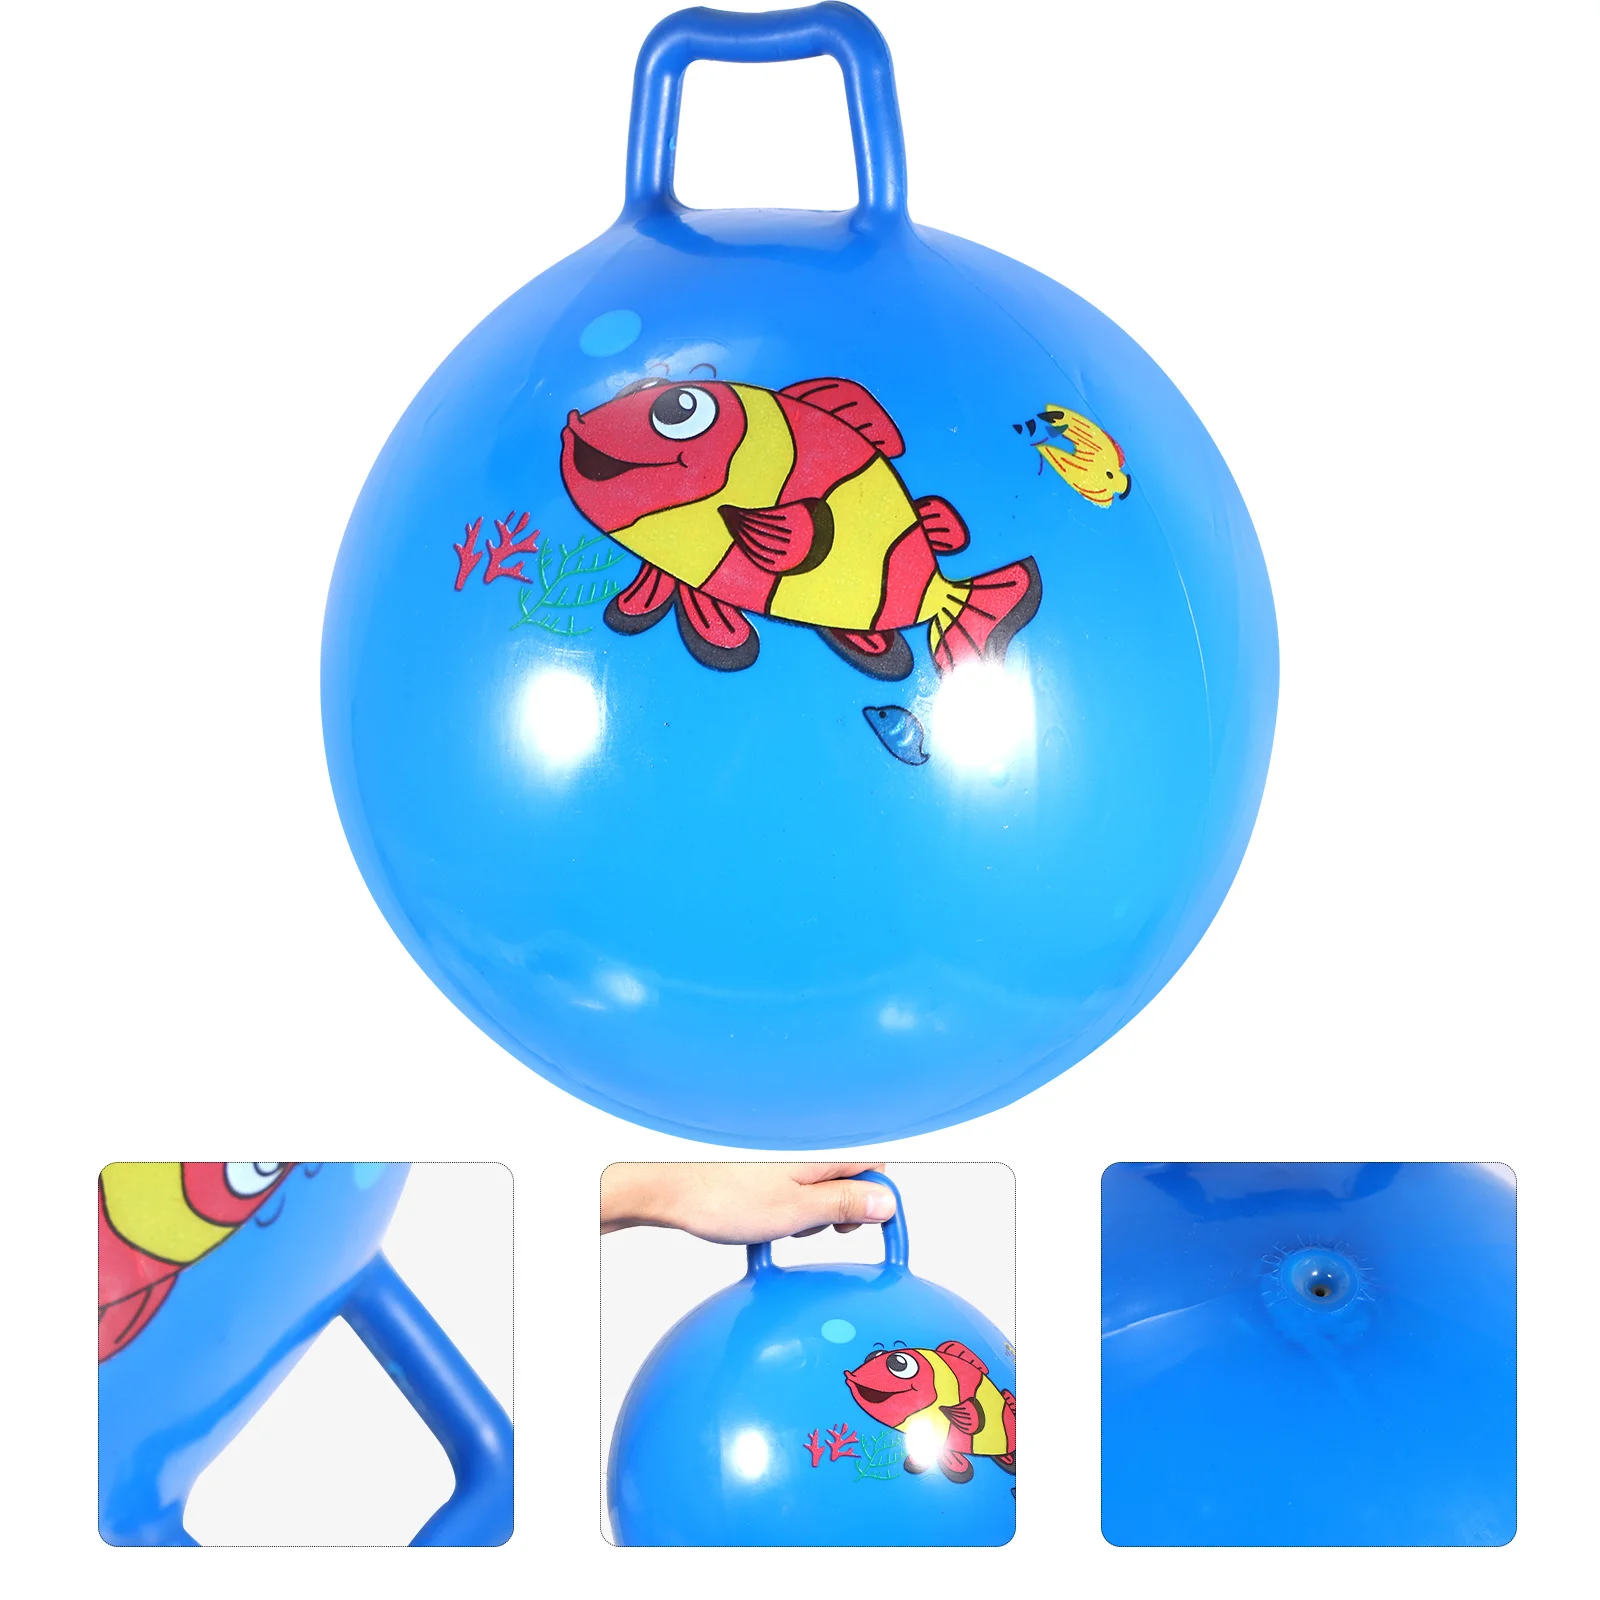 

Hopper Ball Exercise Toy for Kids - 25cm Bouncy Balance Ball with Handle (Random Color)